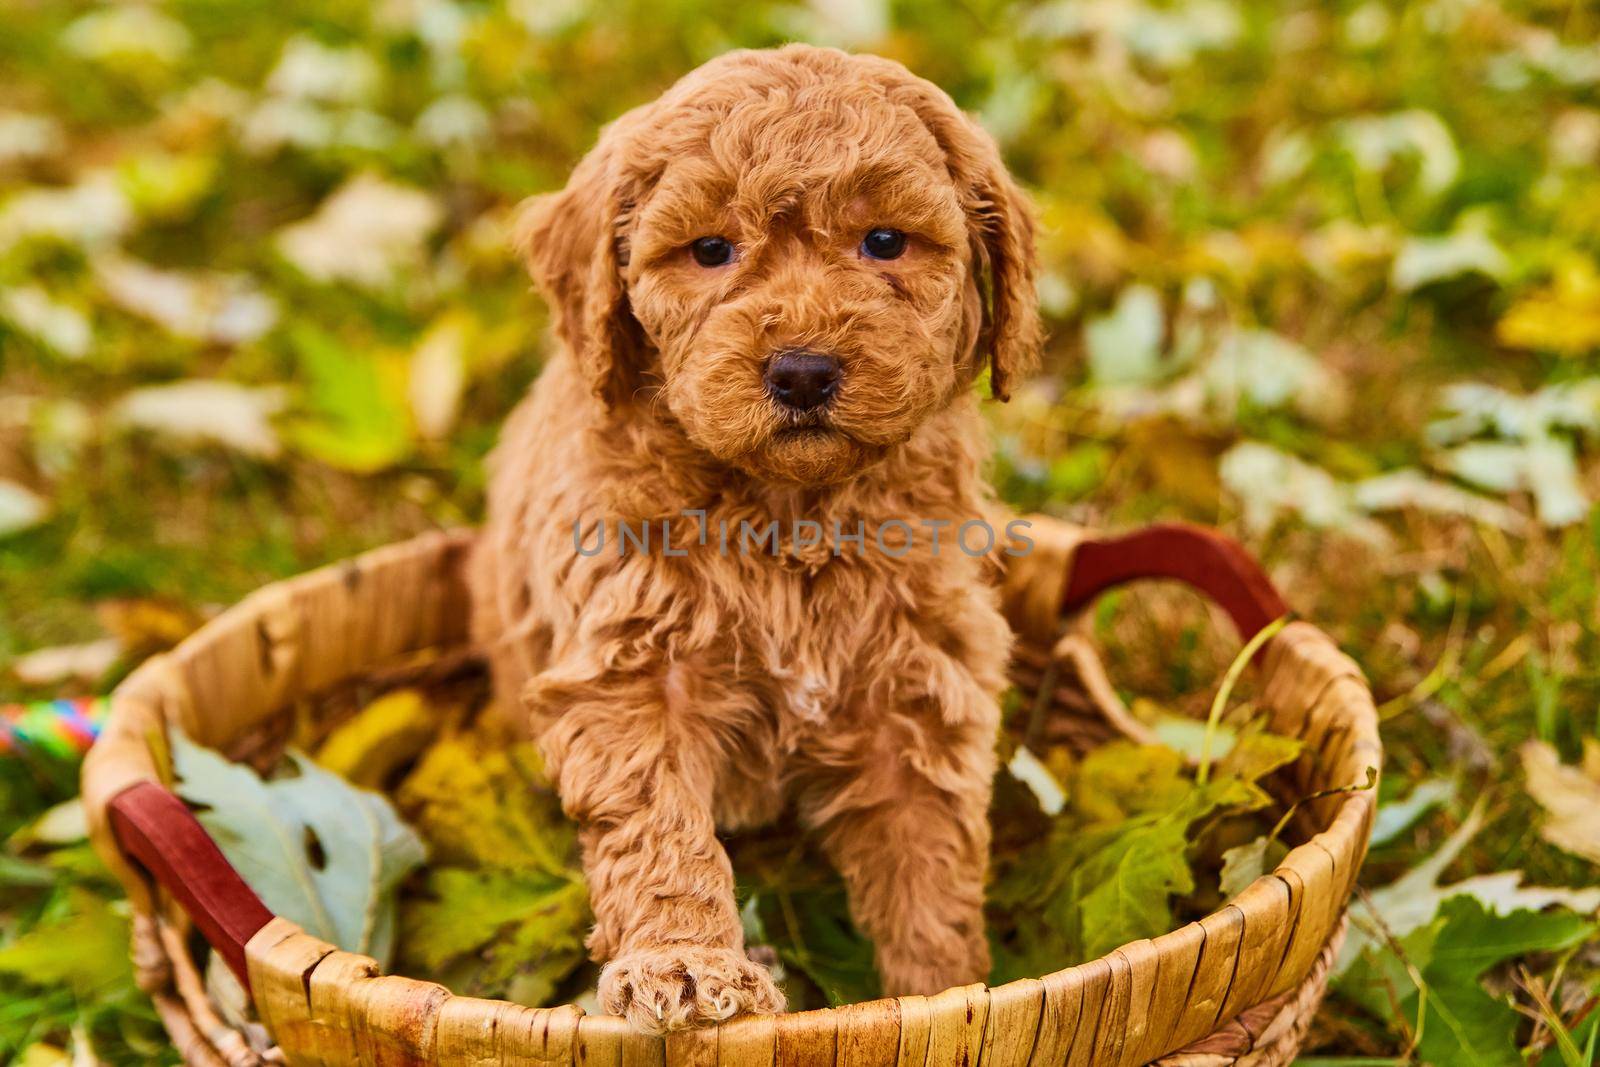 Image of Light brown and curly goldendoodle puppy in woven basket filled with fall leaves